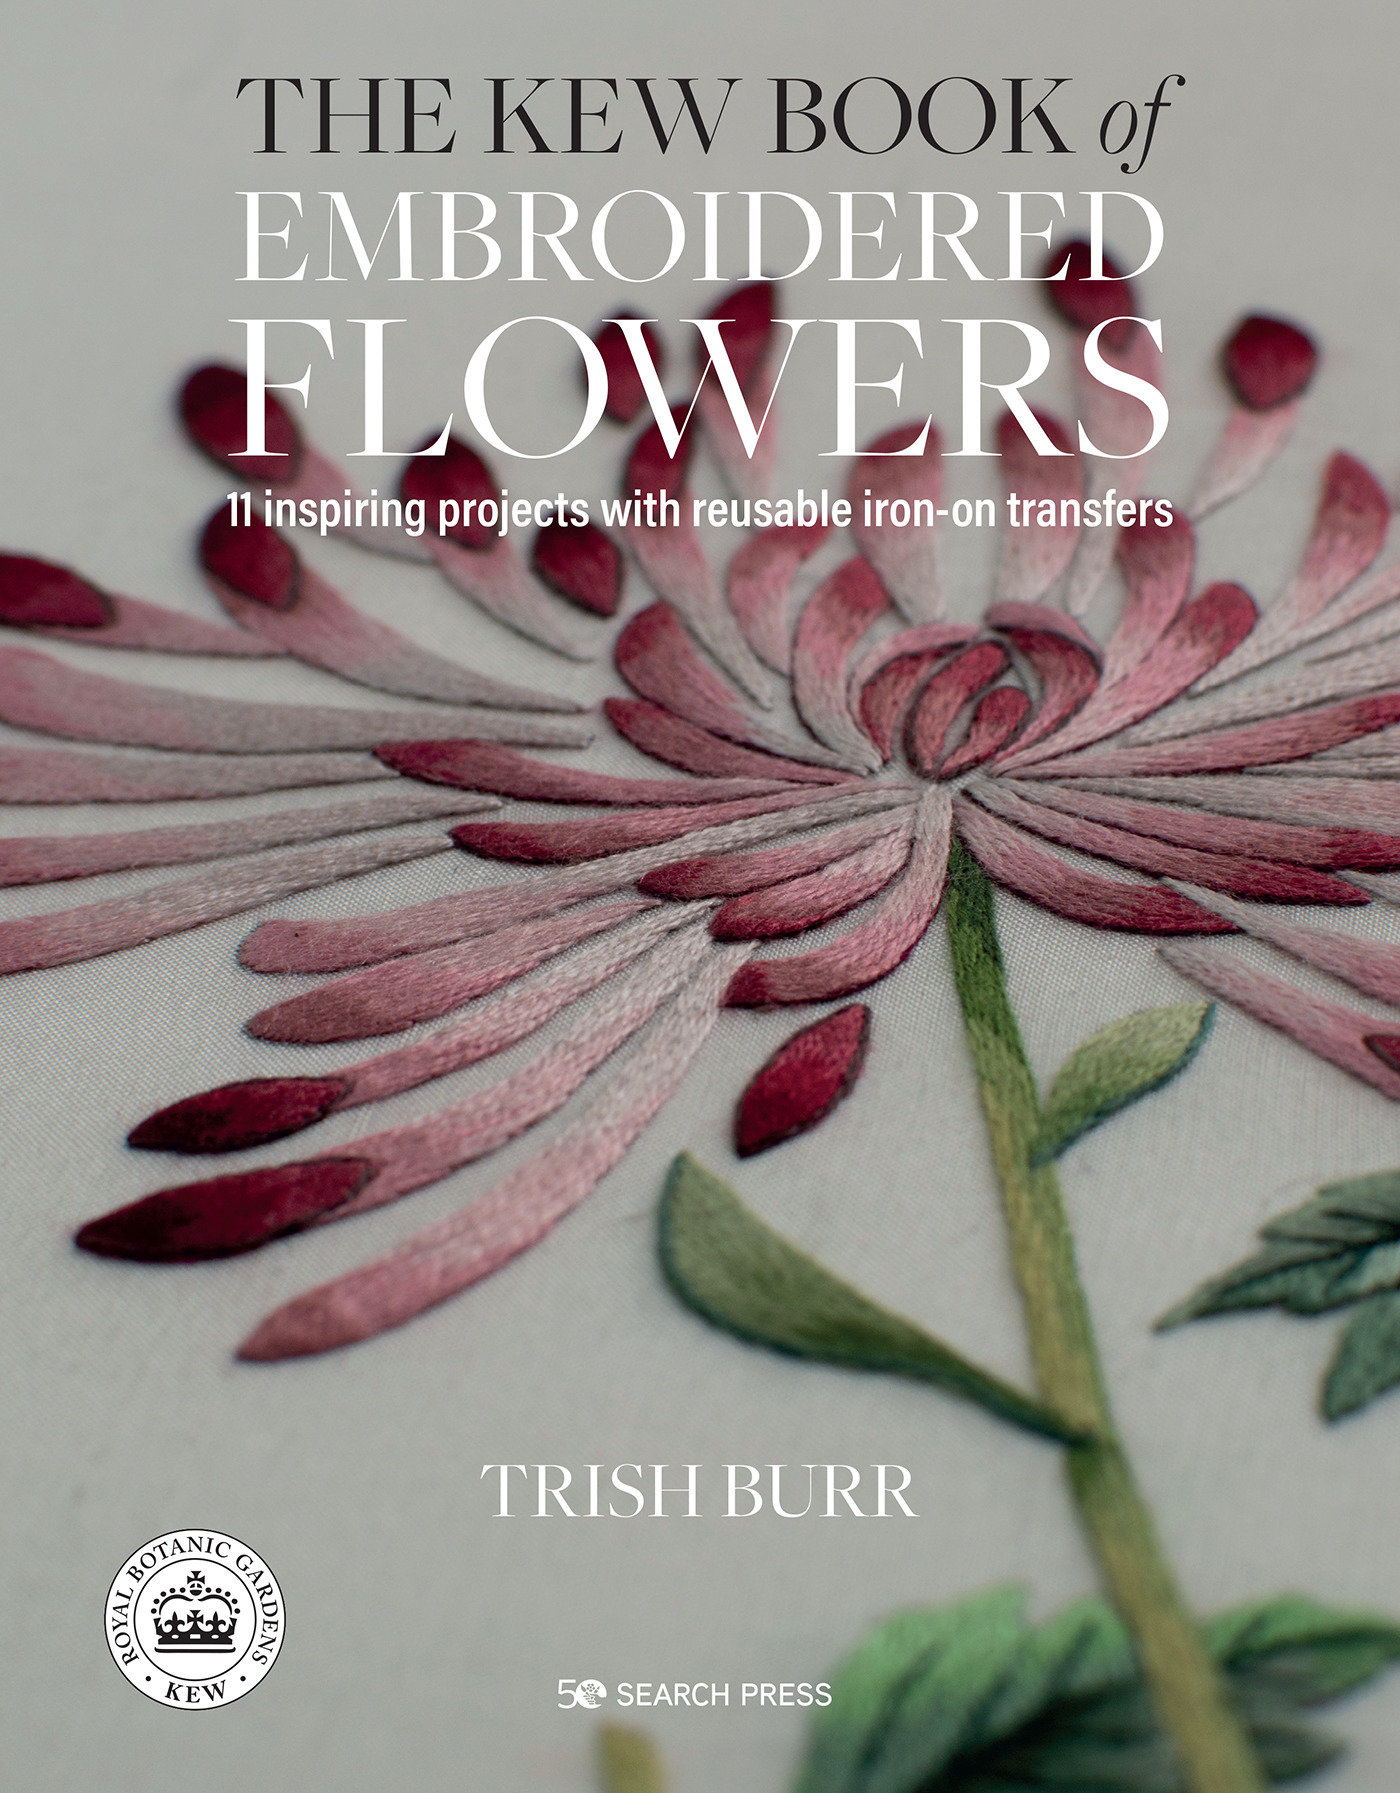 Kew Book Of Embroidered Flowers, The (Hardcover Book)